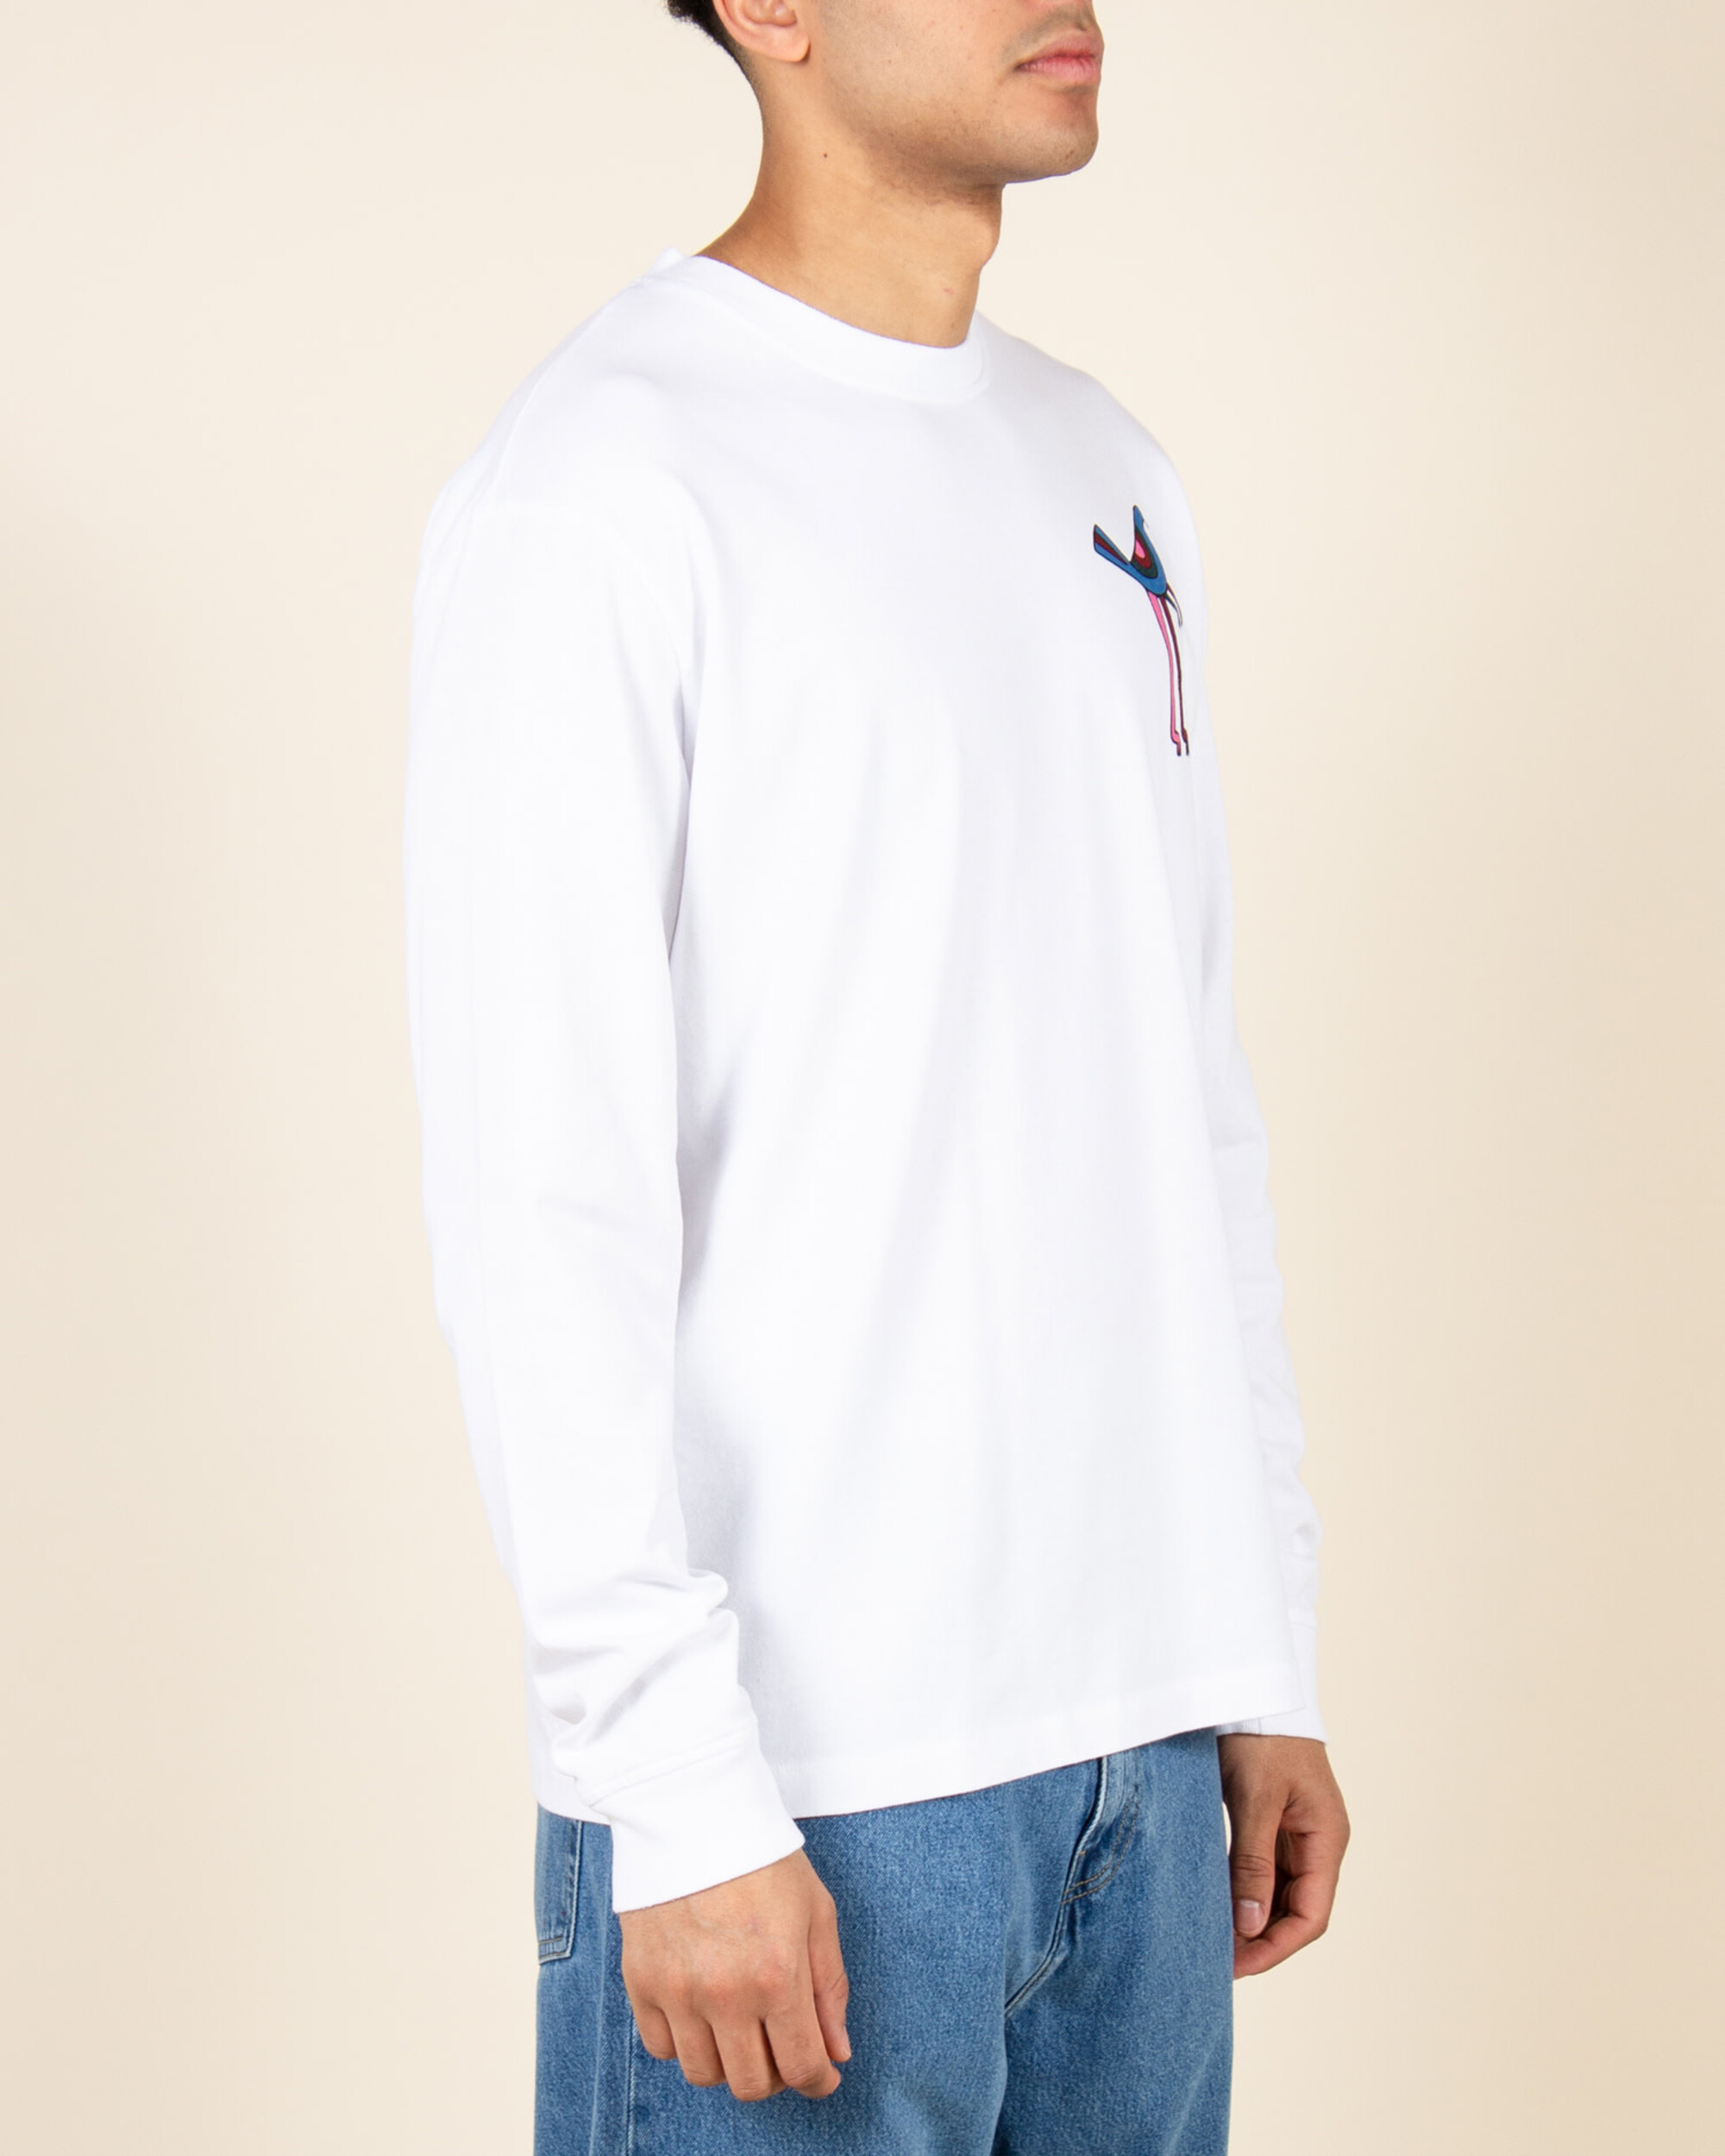 Parra Wine And Books Longsleeve T-Shirt - White